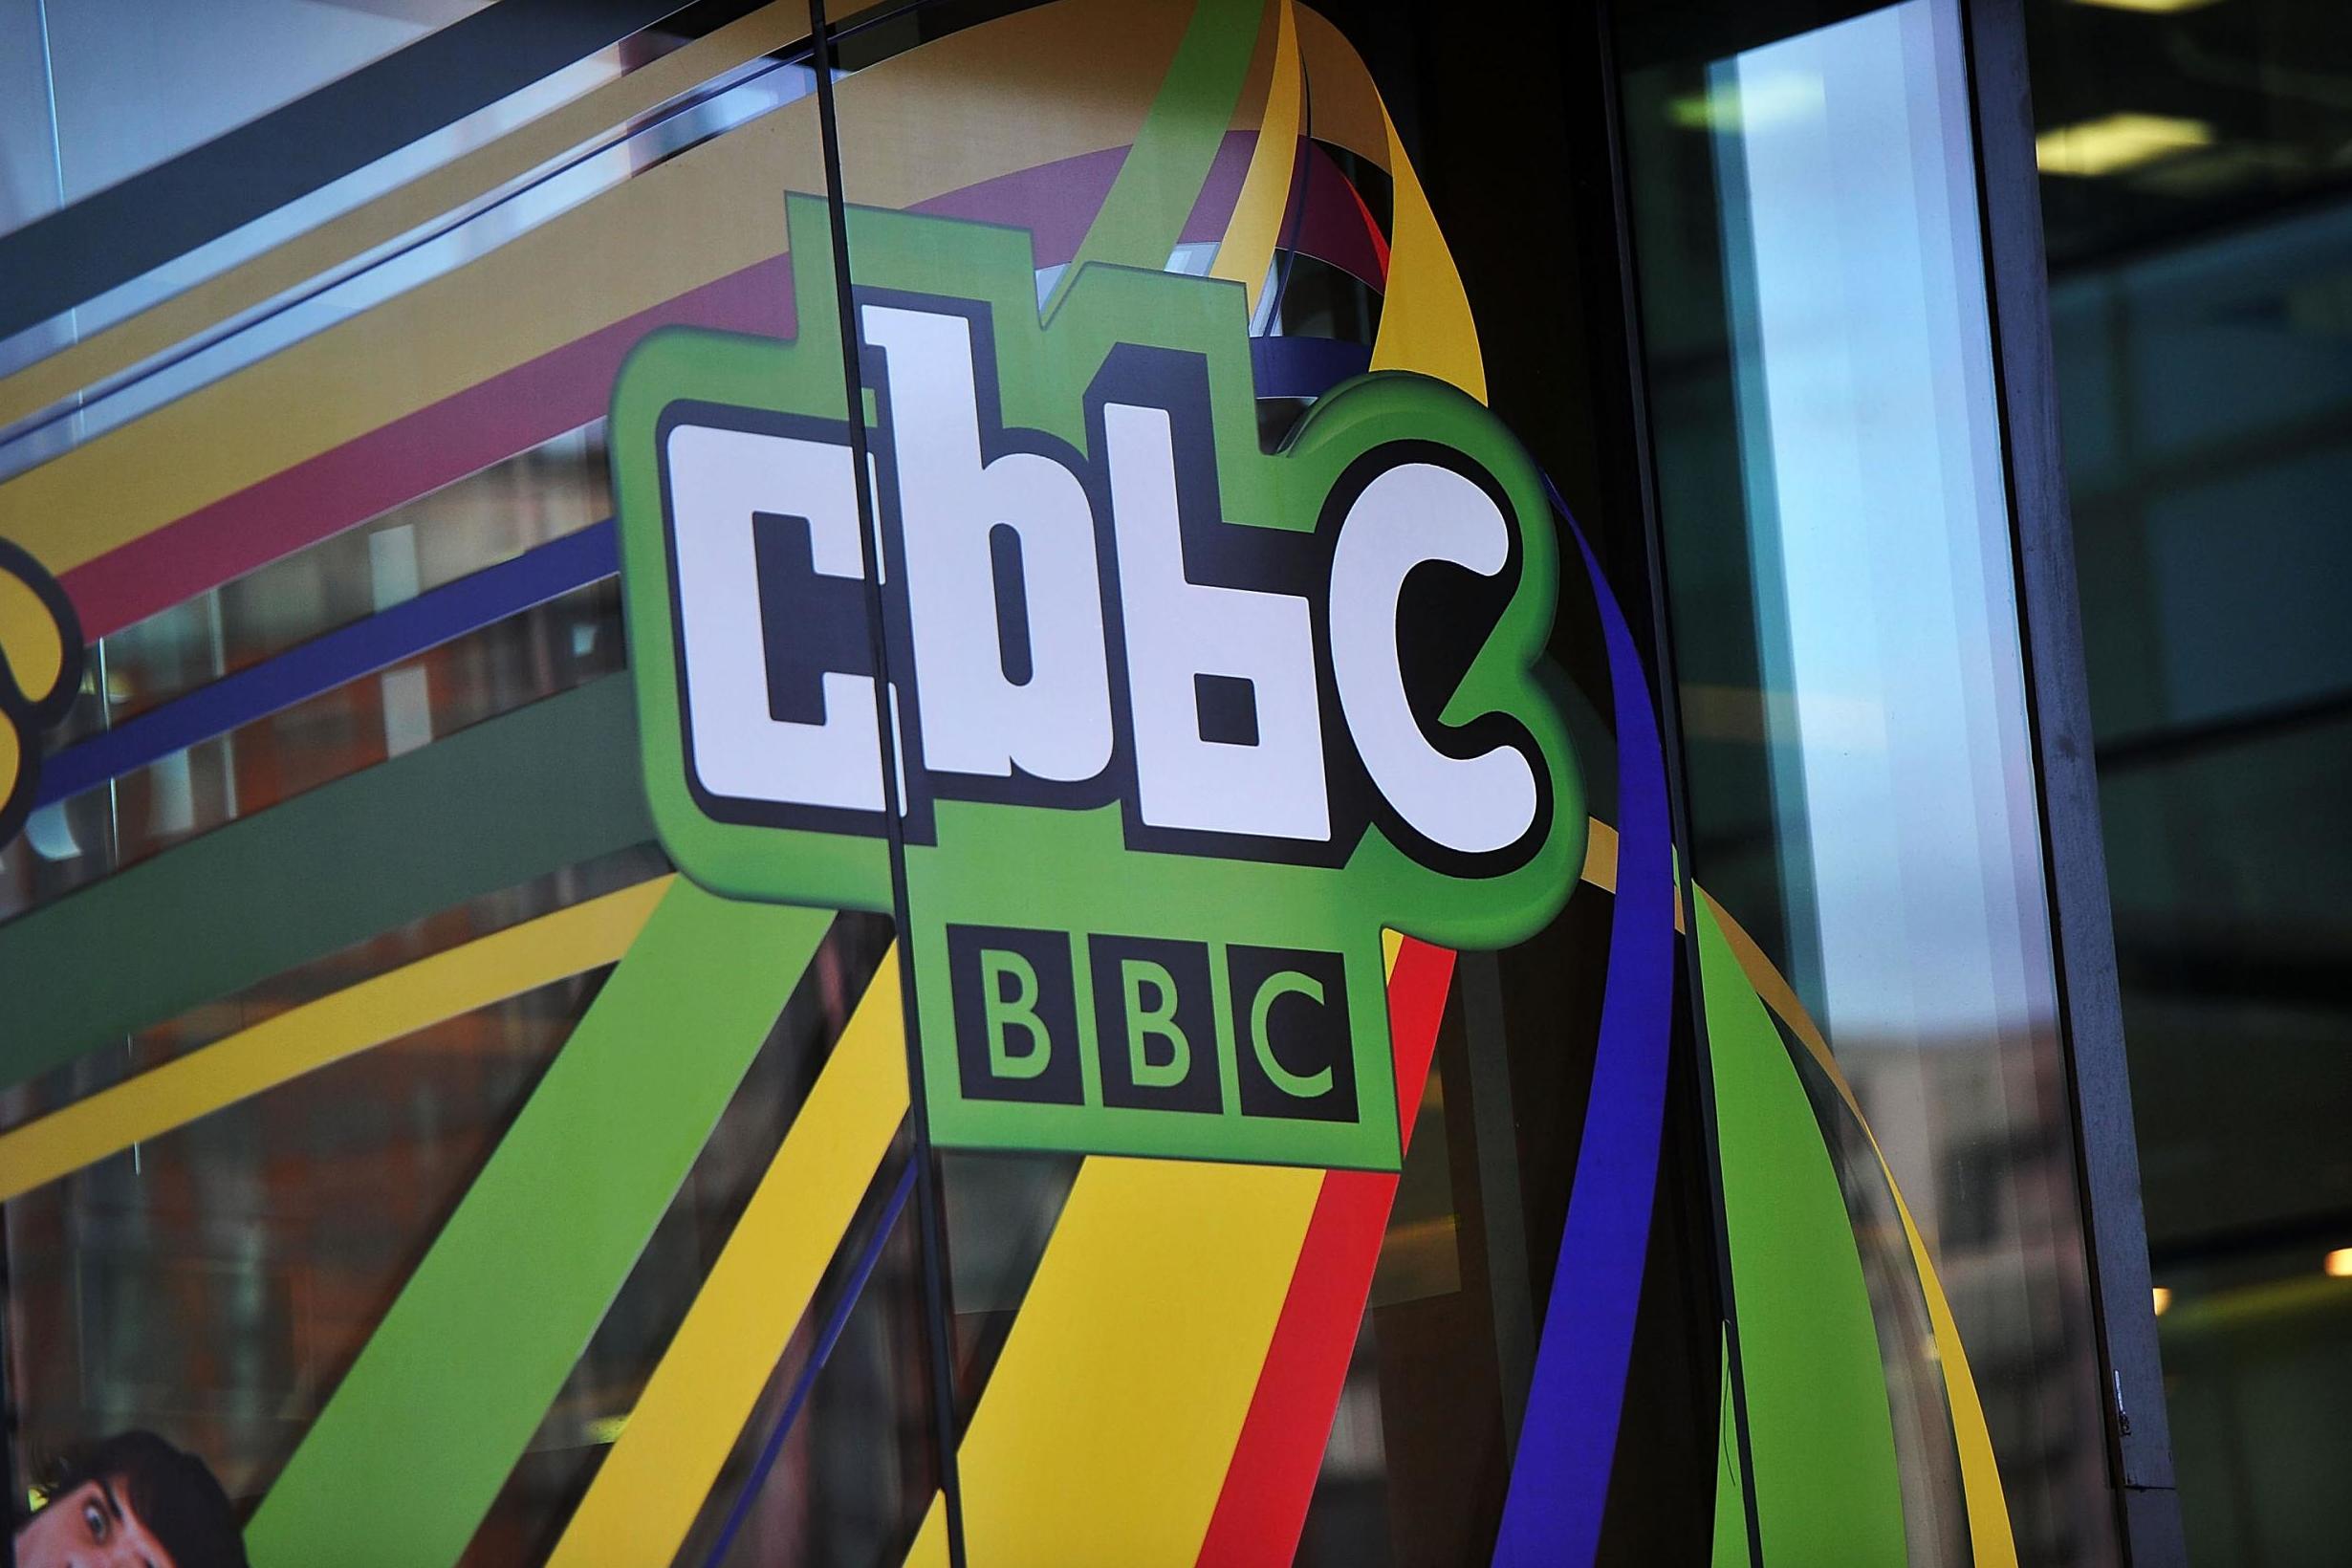 The CBBC studio in Media City on 6 January, 2012 in Salford, Manchester, England.